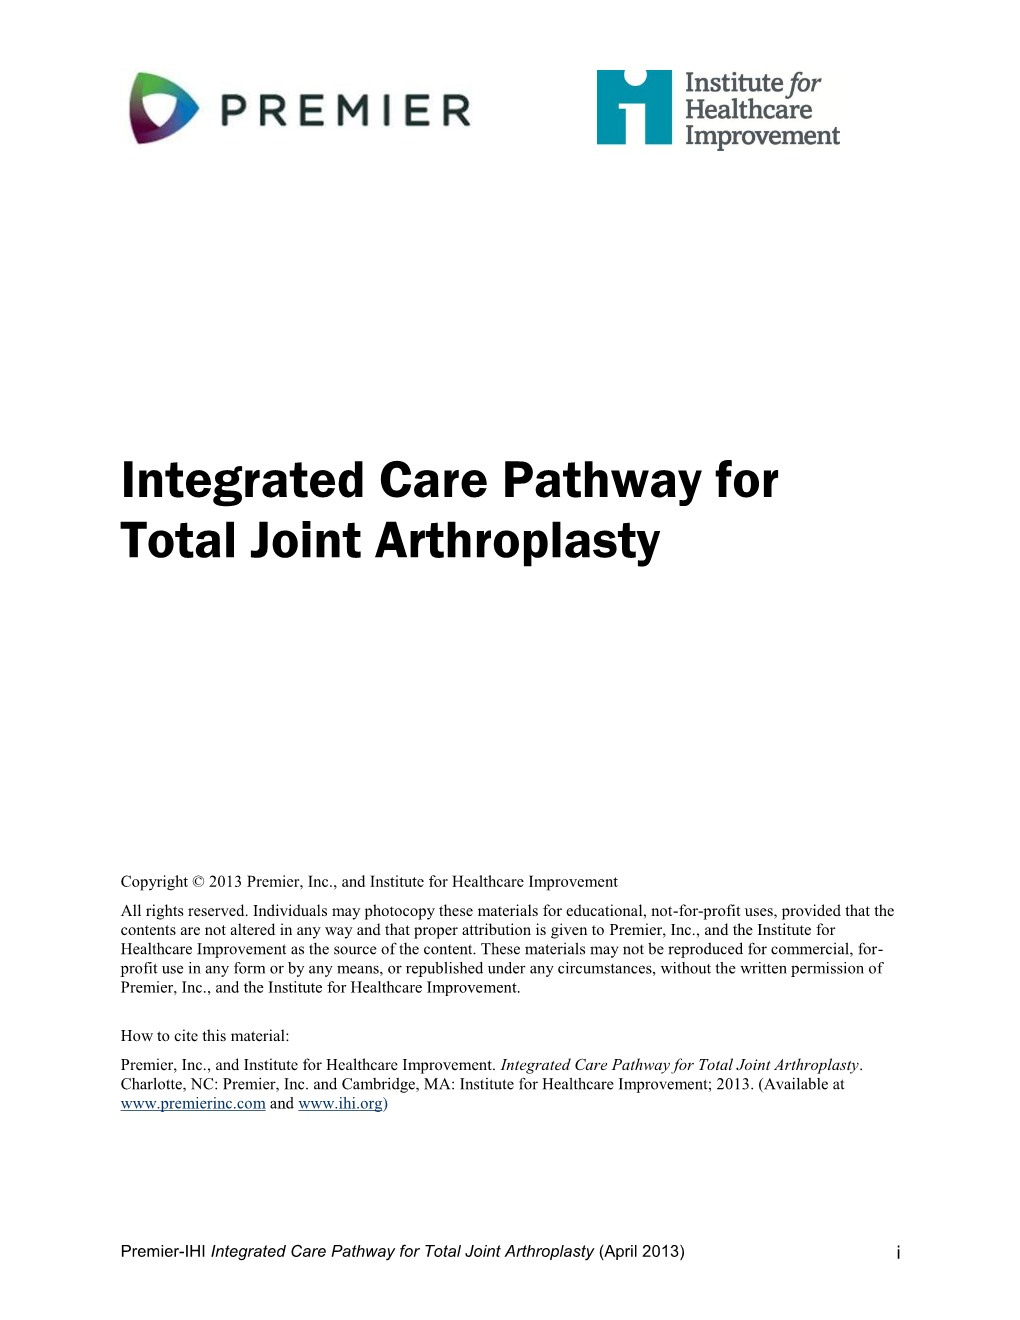 Integrated Care Pathway for Total Joint Arthroplasty